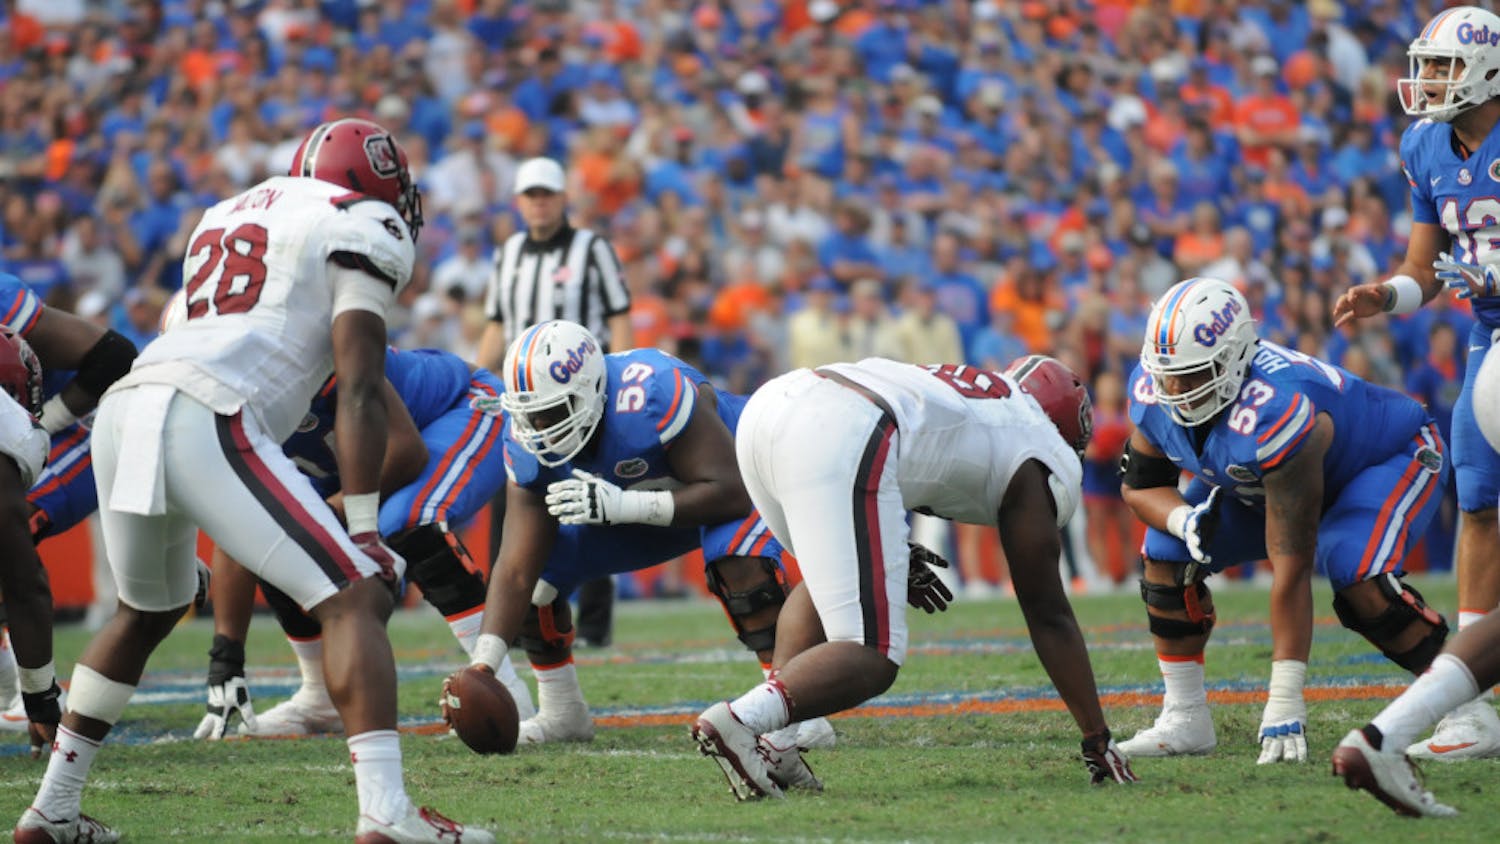 T.J. McCoy (59) prepares to snap the ball during Florida's win against South Carolina on Nov. 12, 2016, at Ben Hill Griffin Stadium.